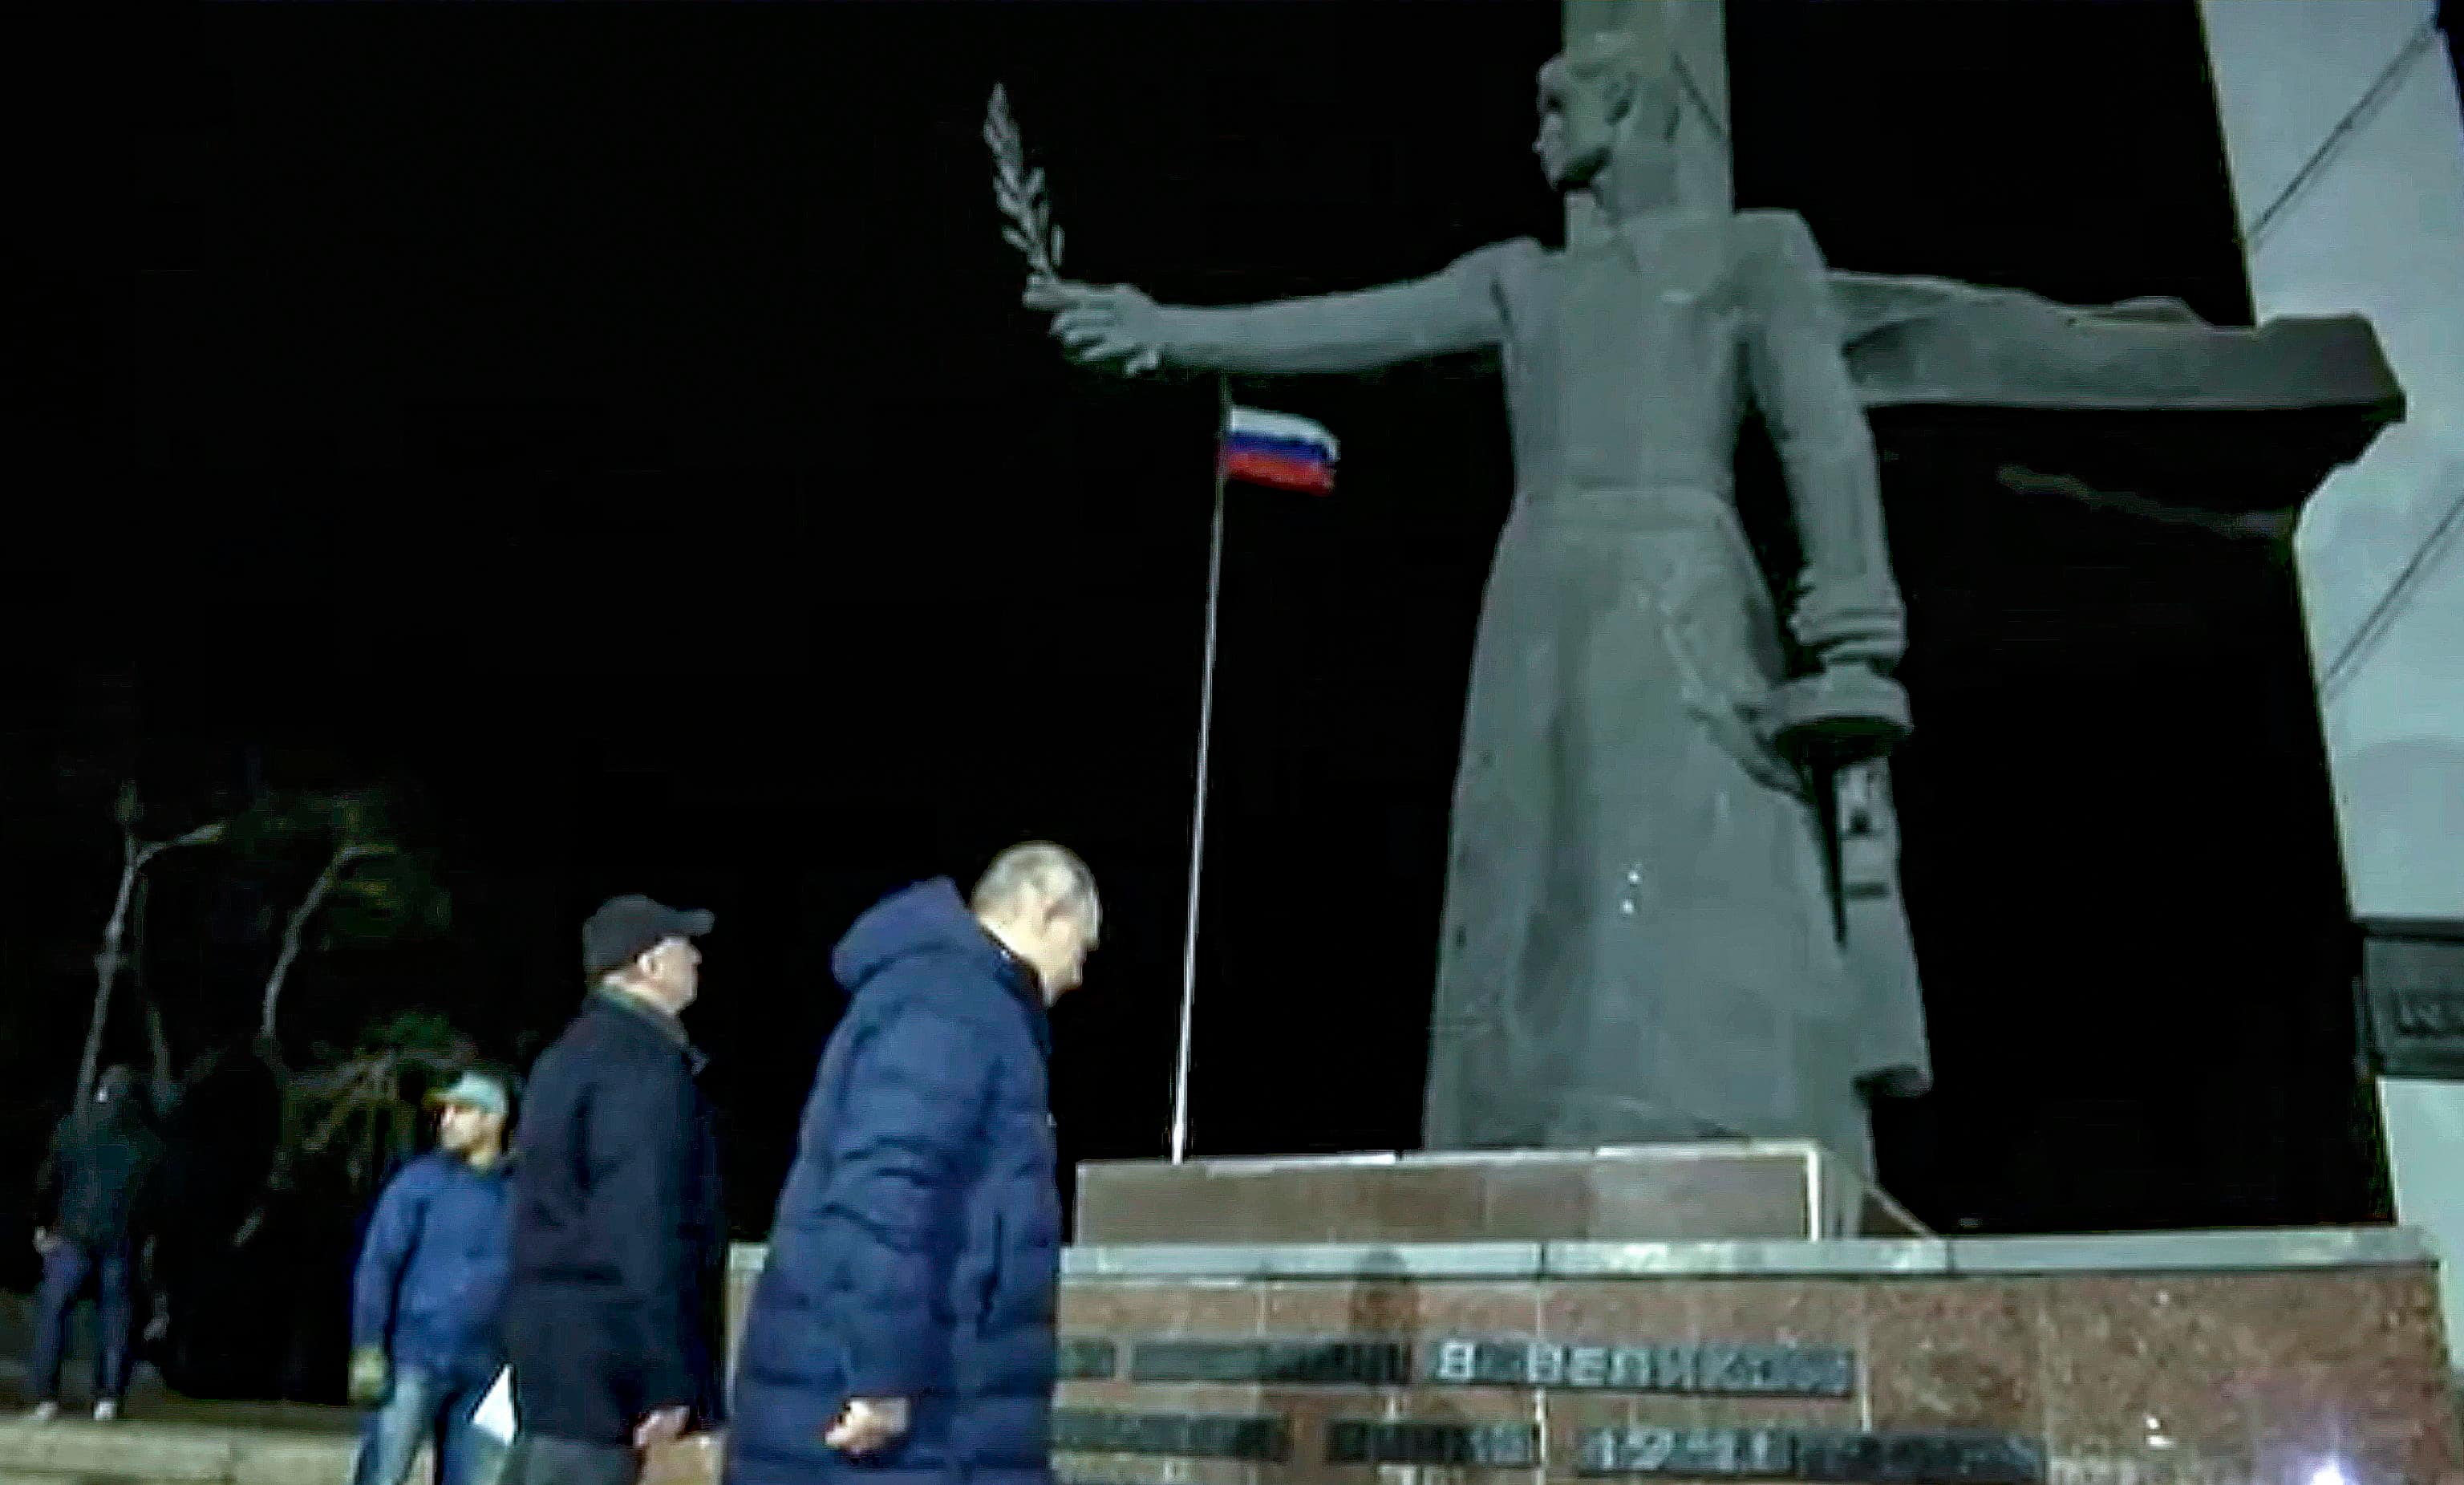 epa10532128 A still image taken from a handout video provided by the Russian President's press service on 19 March 2023 shows Russian President Vladimir Putin (R) with Deputy Prime Minister Marat Khusnullin (2-L) stand near the WWII monument during his visit to Mariupol, eastern Ukraine, late 18 March 2023. Putin visited the Russian-occupied city after he visited Crimea on the ninth anniversary of Russia's annexation of the Black Sea peninsula. According to the Kremlin, Putin had conversations with local residents, visited an apartment of one of the locals, assessed new roads, and followed the construction of new facilities in the city. On 24 February 2022 Russian troops entered the Ukrainian territory in what the Russian president declared to be a 'Special Military Operation', starting an armed conflict that has provoked destruction and a humanitarian crisis.  EPA/RUSSIAN PRESIDENT PRESS SERVICE/HANDOUT HANDOUT BEST QUALITY AVAILABLE HANDOUT EDITORIAL USE ONLY/NO SALES HANDOUT EDITORIAL USE ONLY/NO SALES